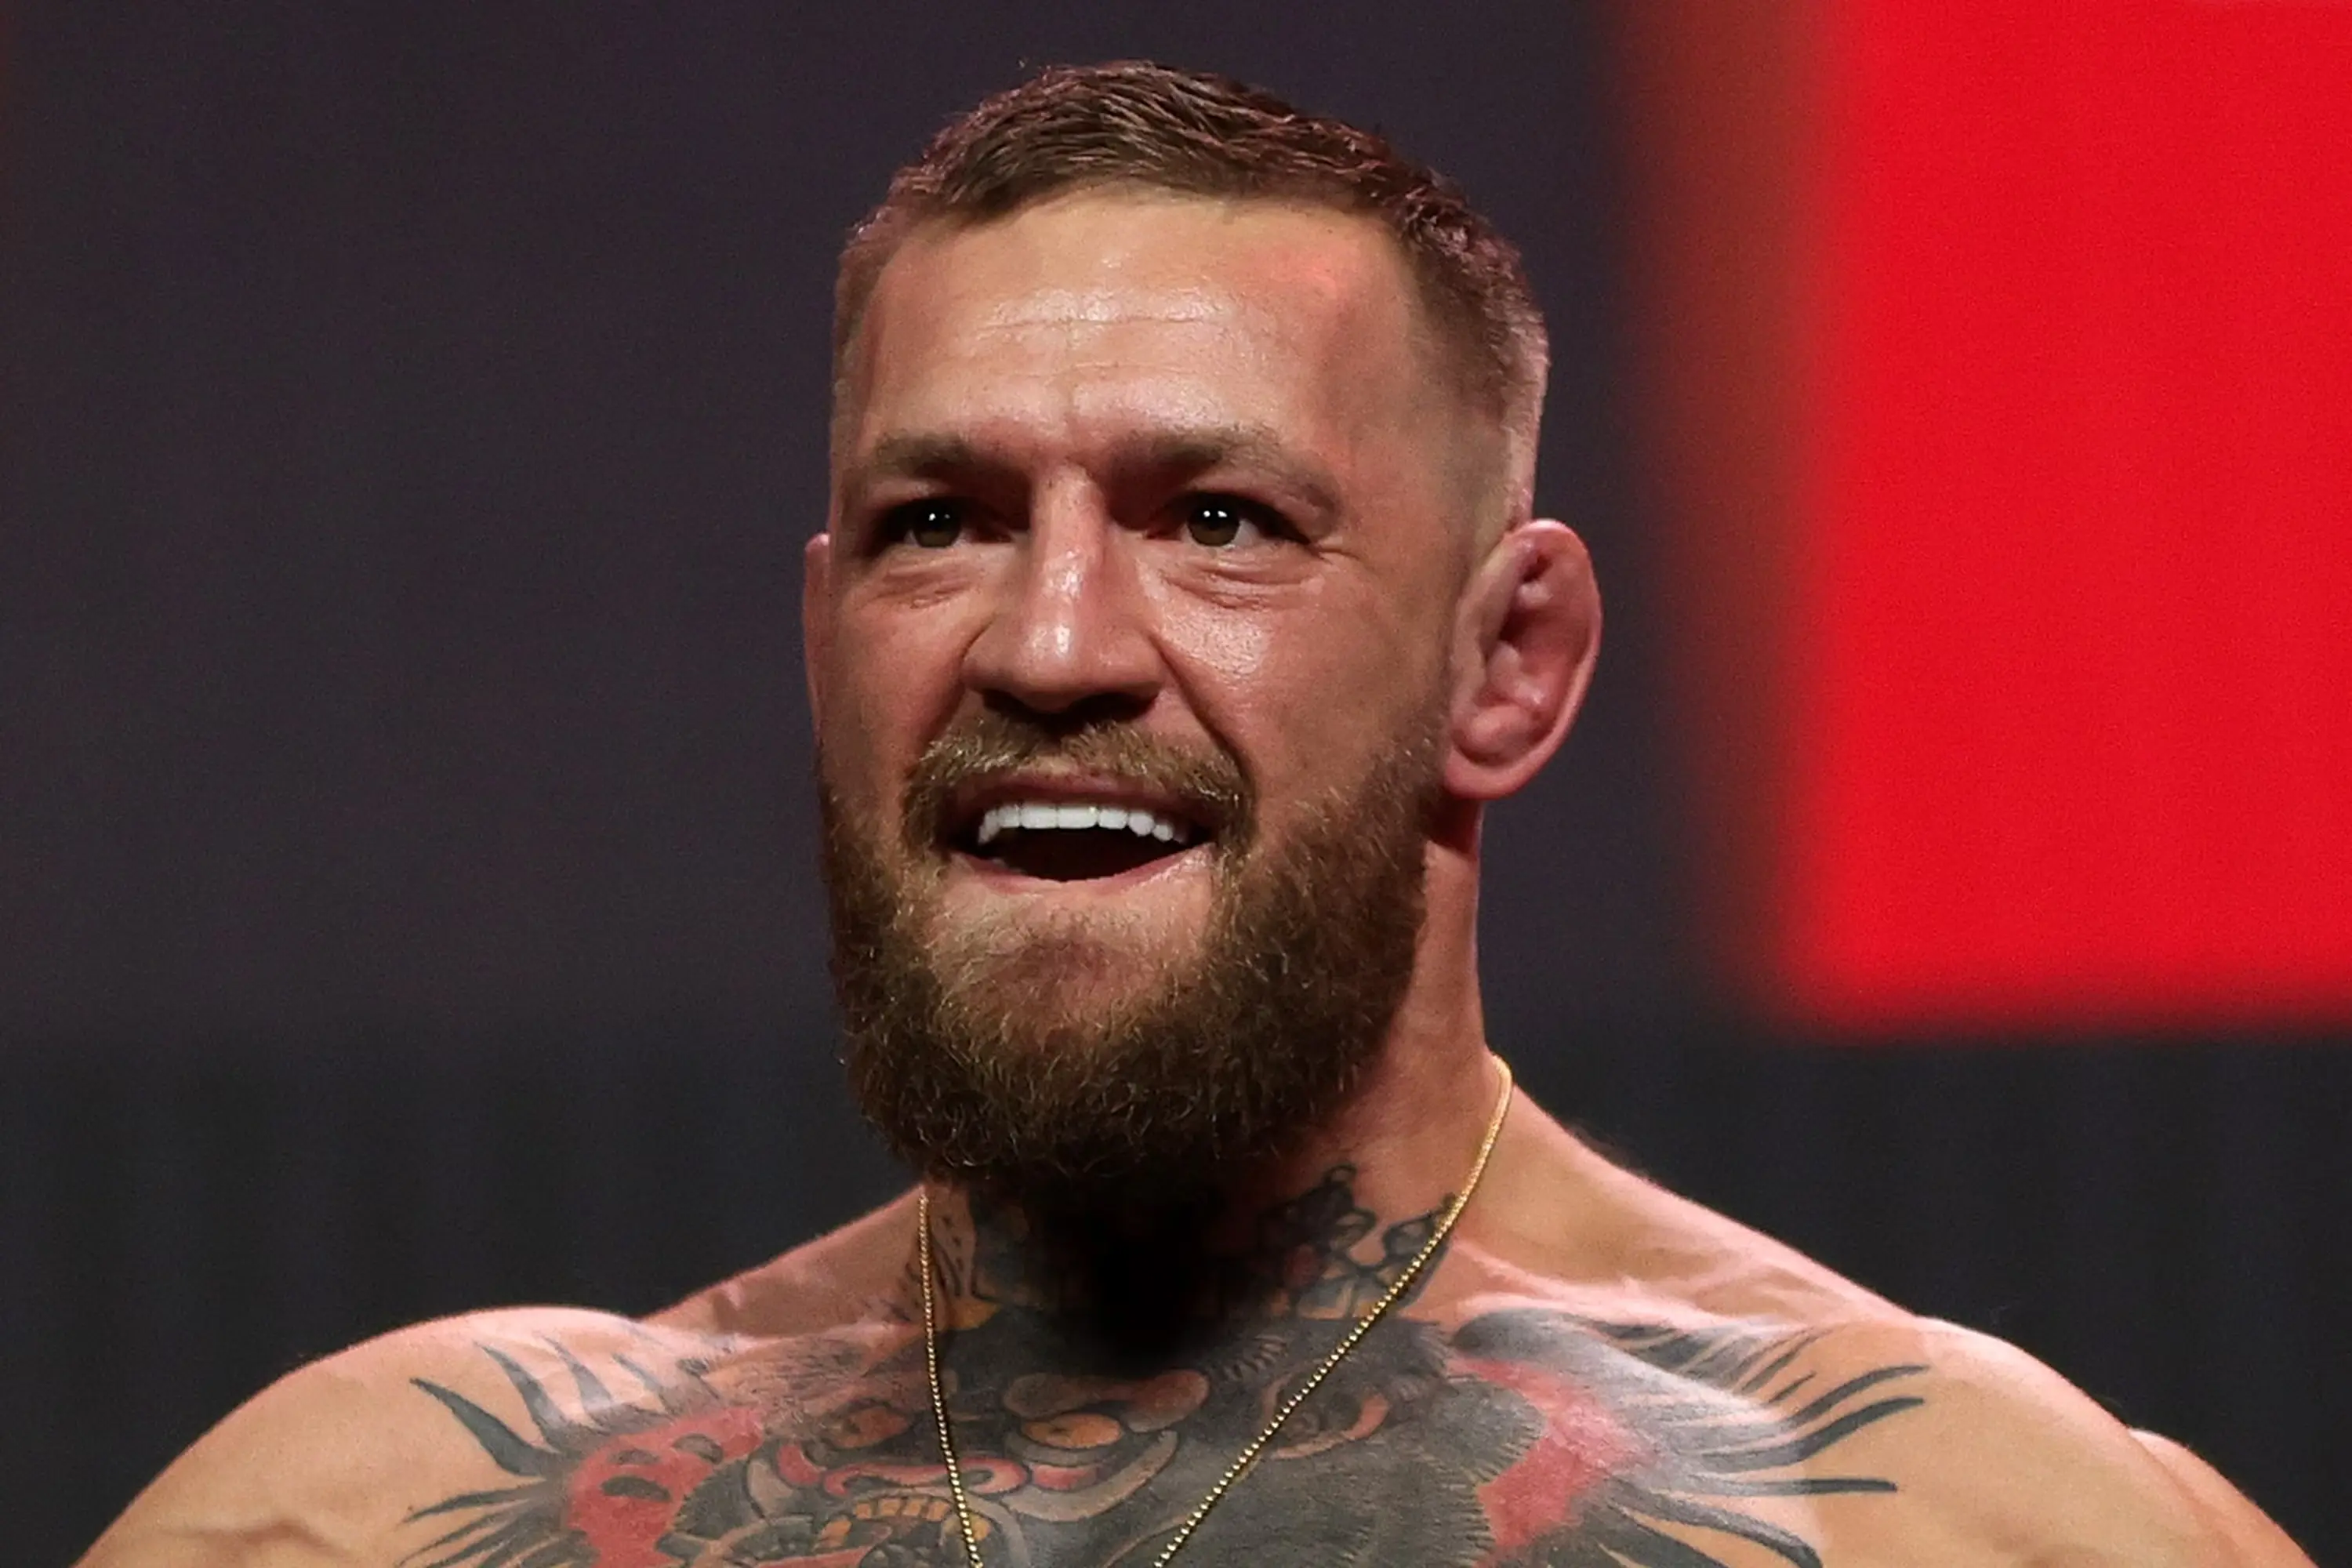 Conor McGregor UFC Return? A Fight On The Way